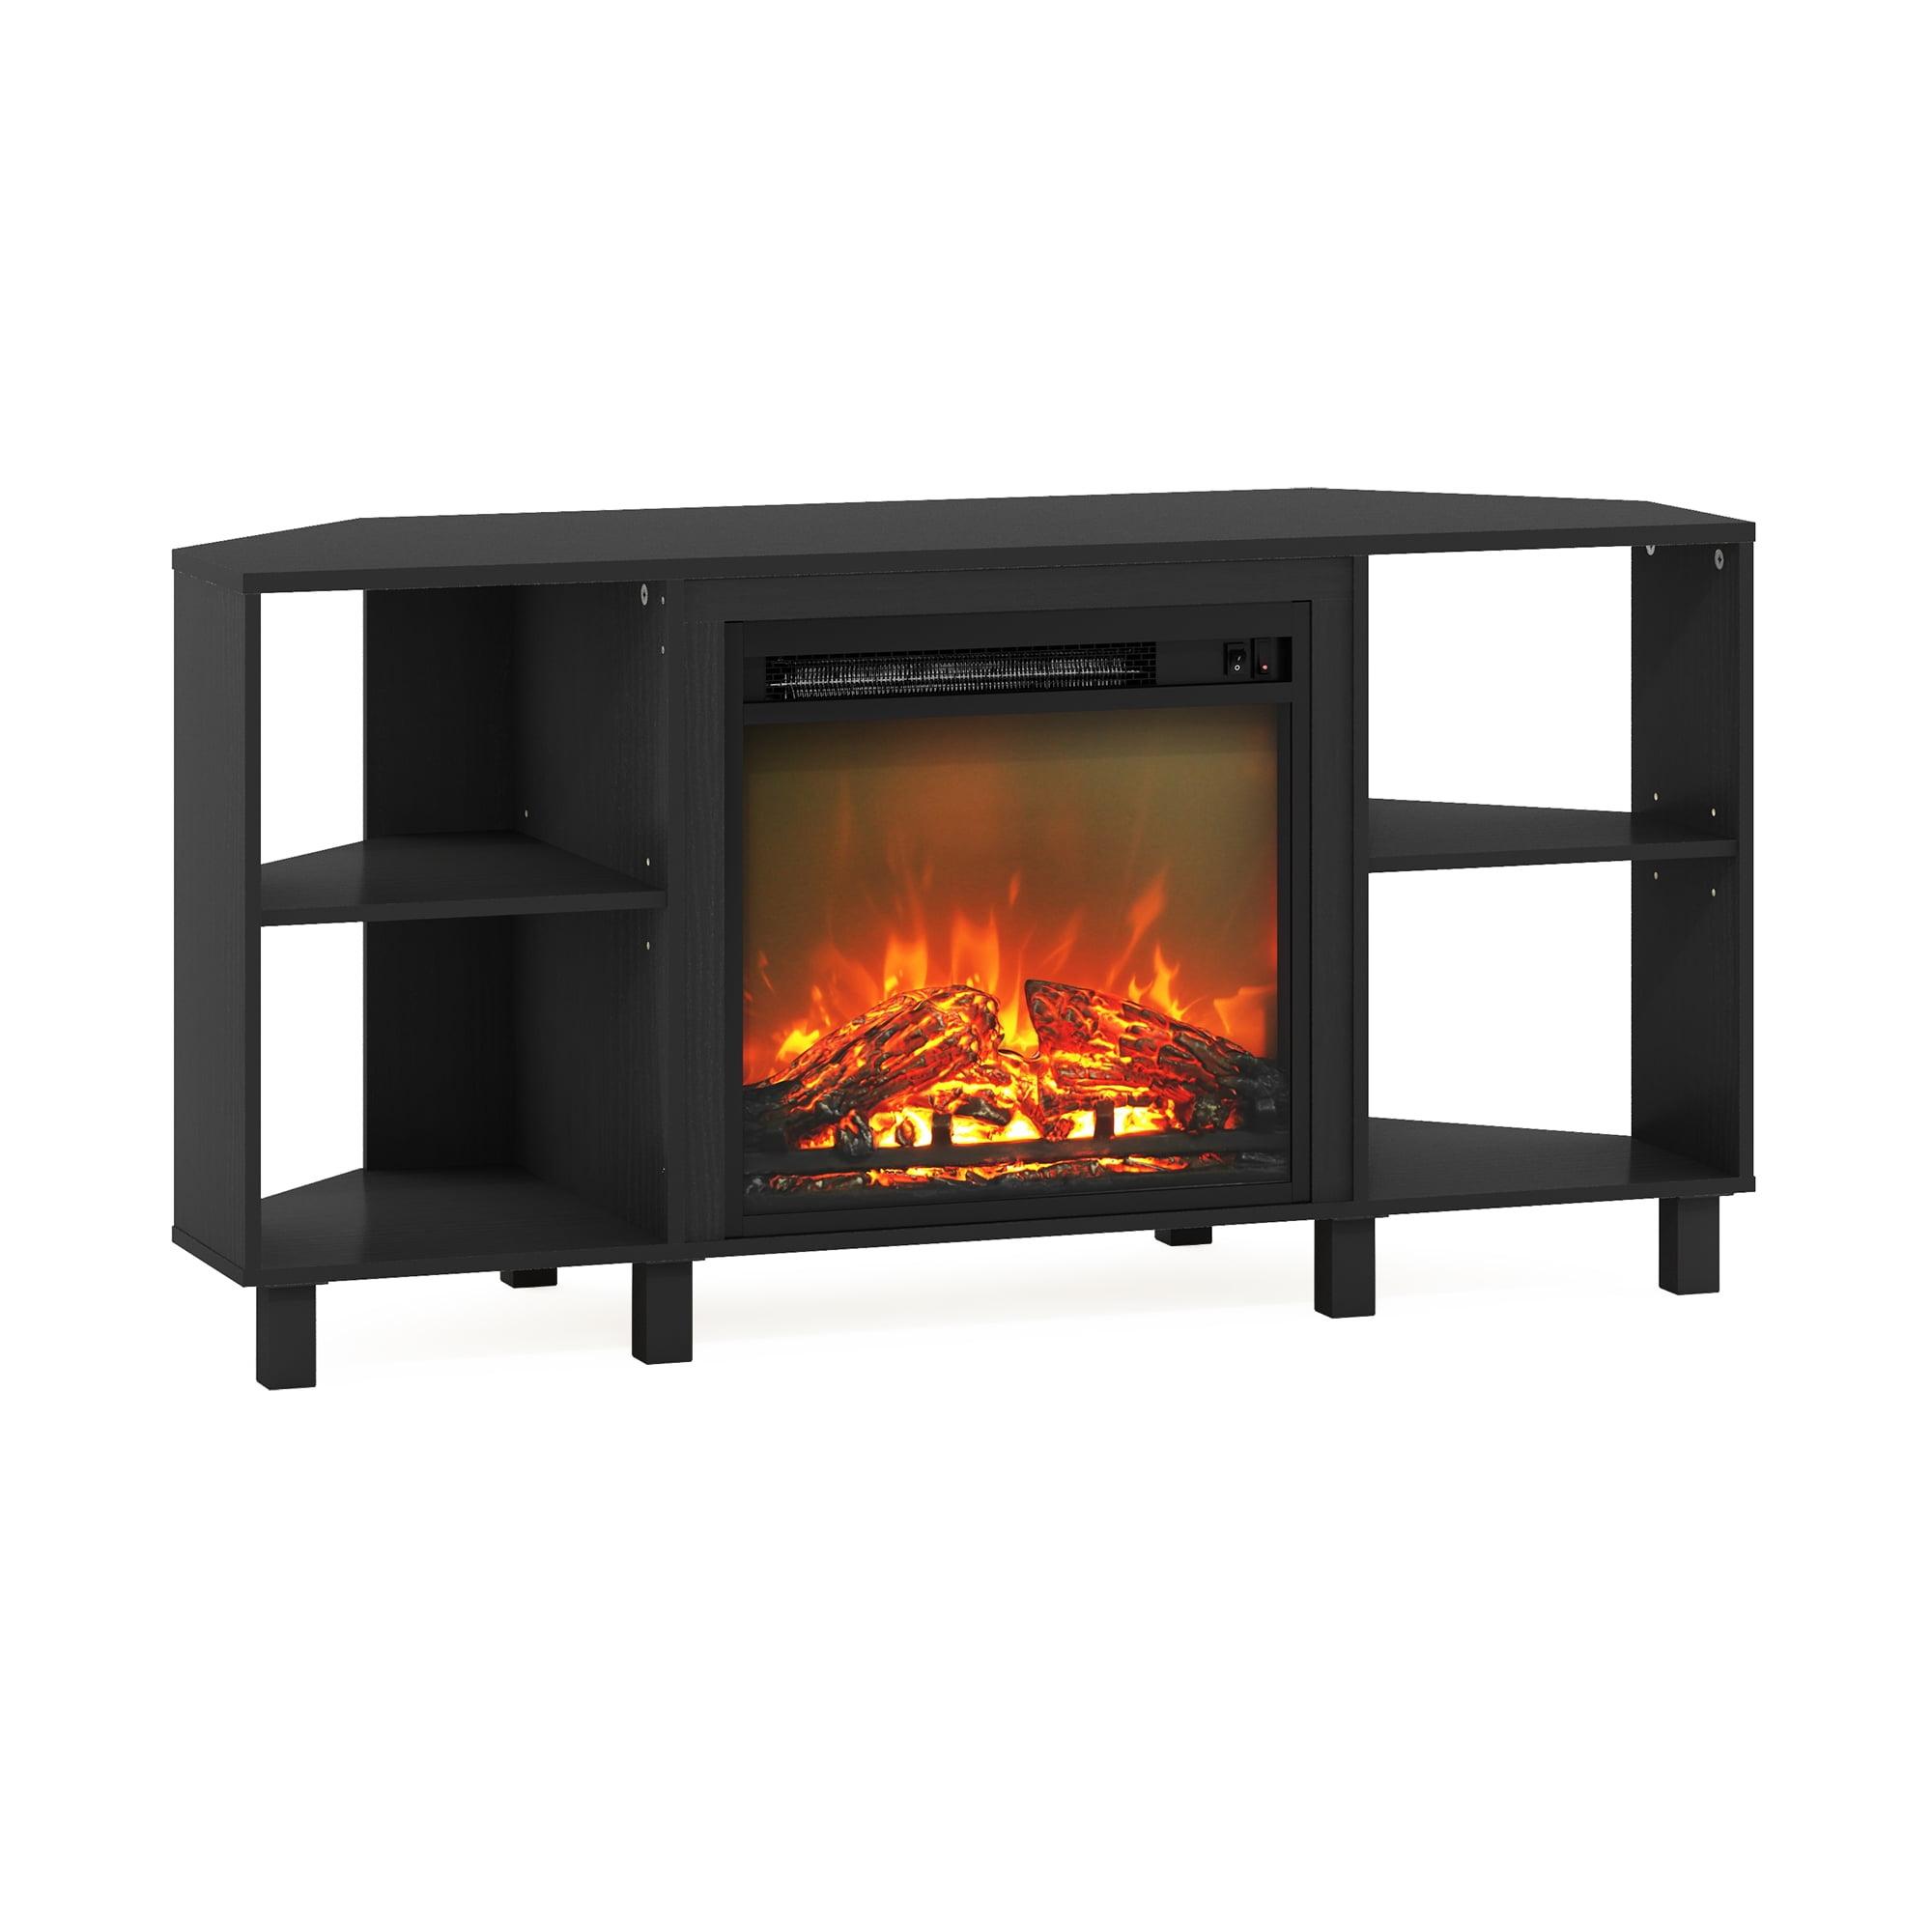 Gray Jensen Corner TV Stand with Electric Fireplace and Metal Legs